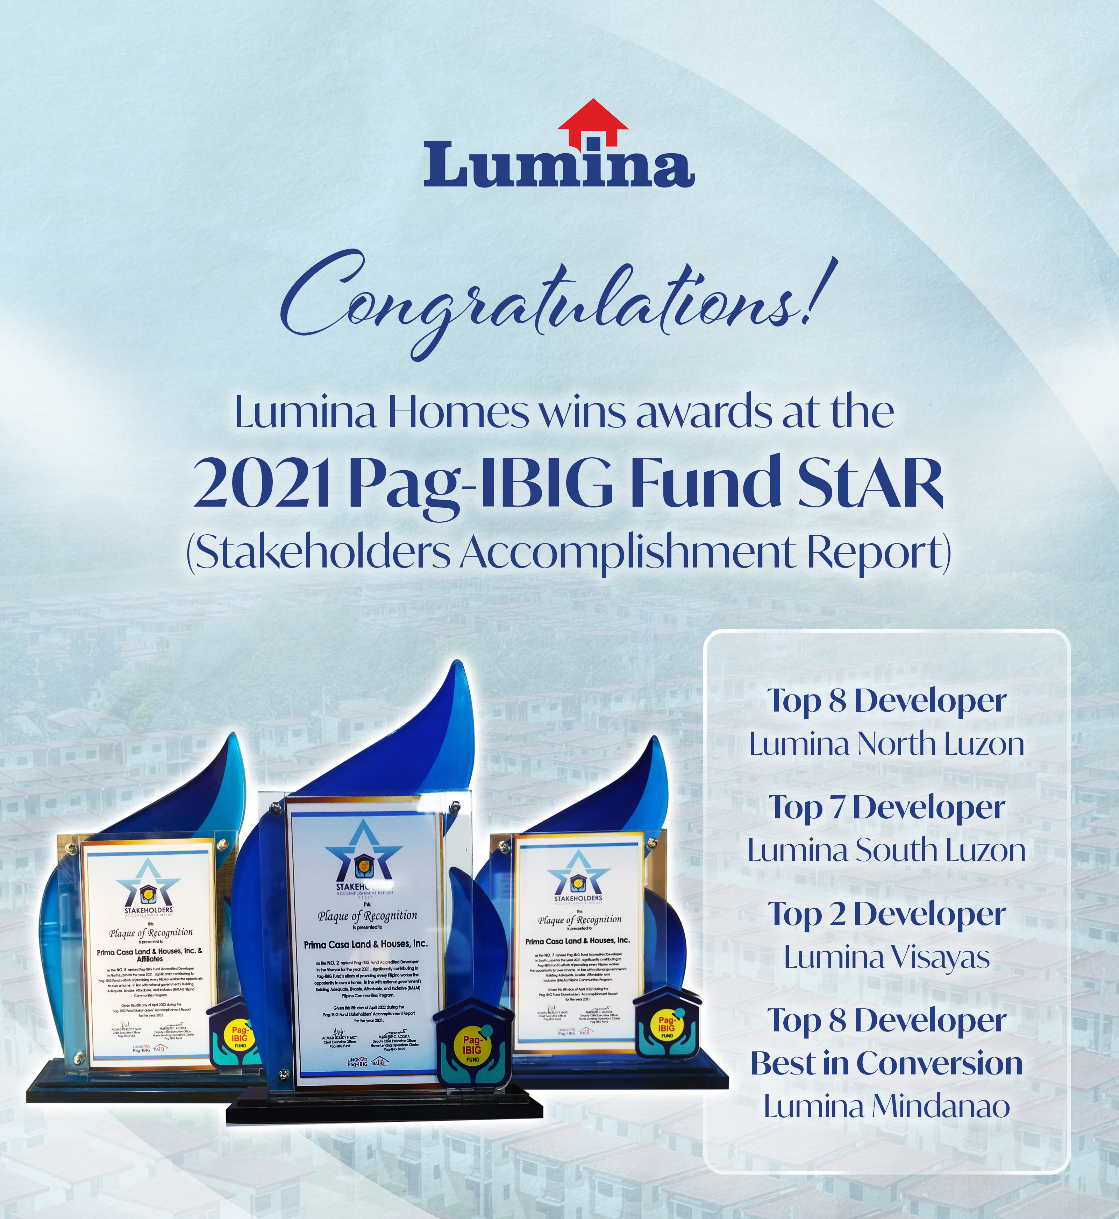 Lumina Homes once again recognized among Pag-IBIG Fund’s Top Developers for 2021